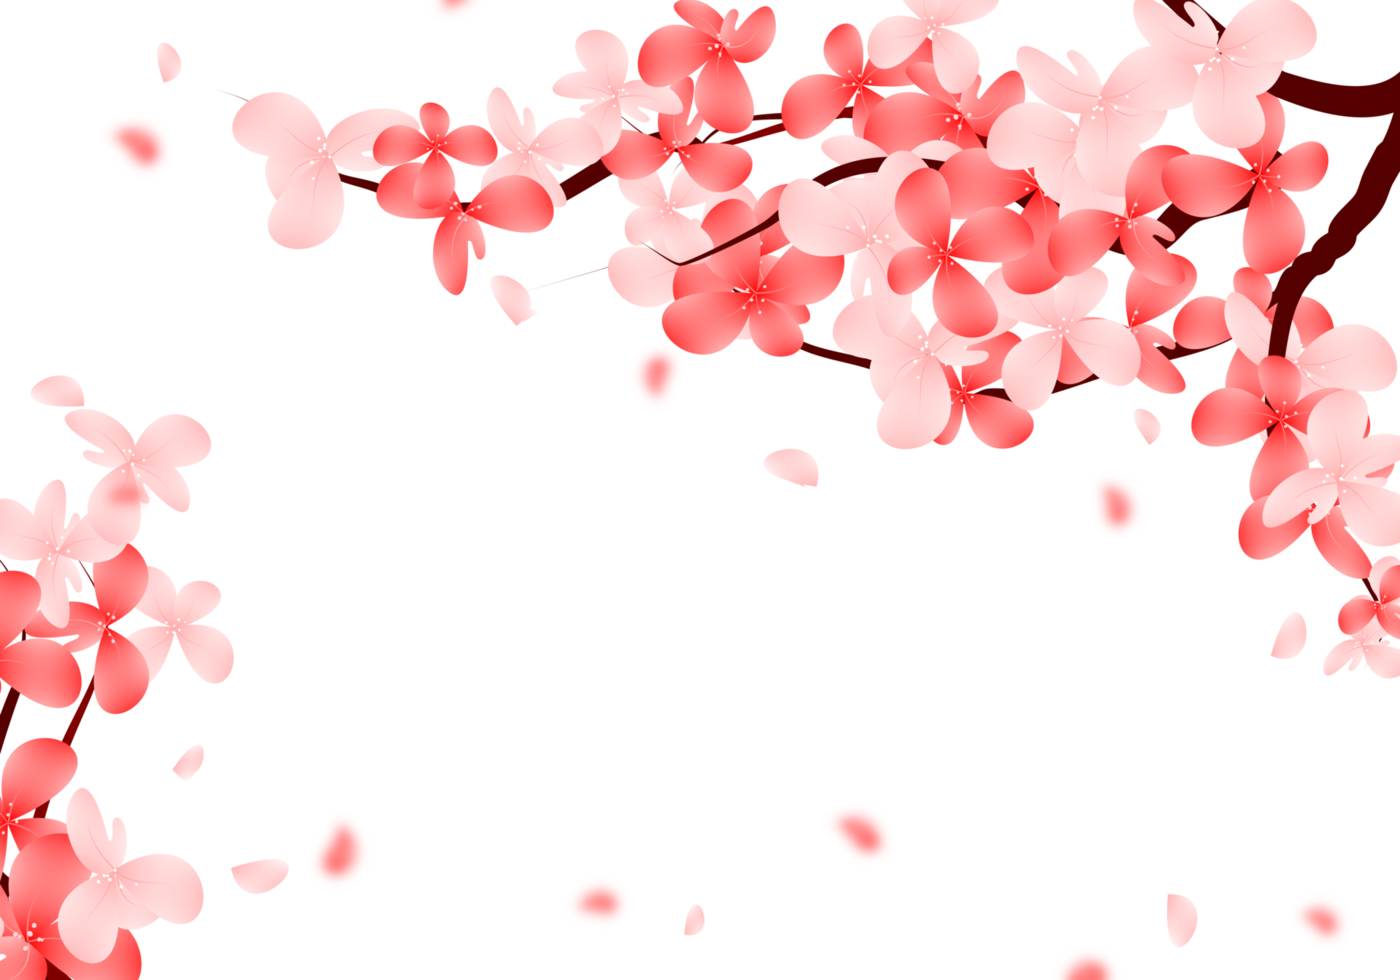 Pink Cherry Blossom Background, Valentines Frame with sakura branch. Cute Falling petals Border. png